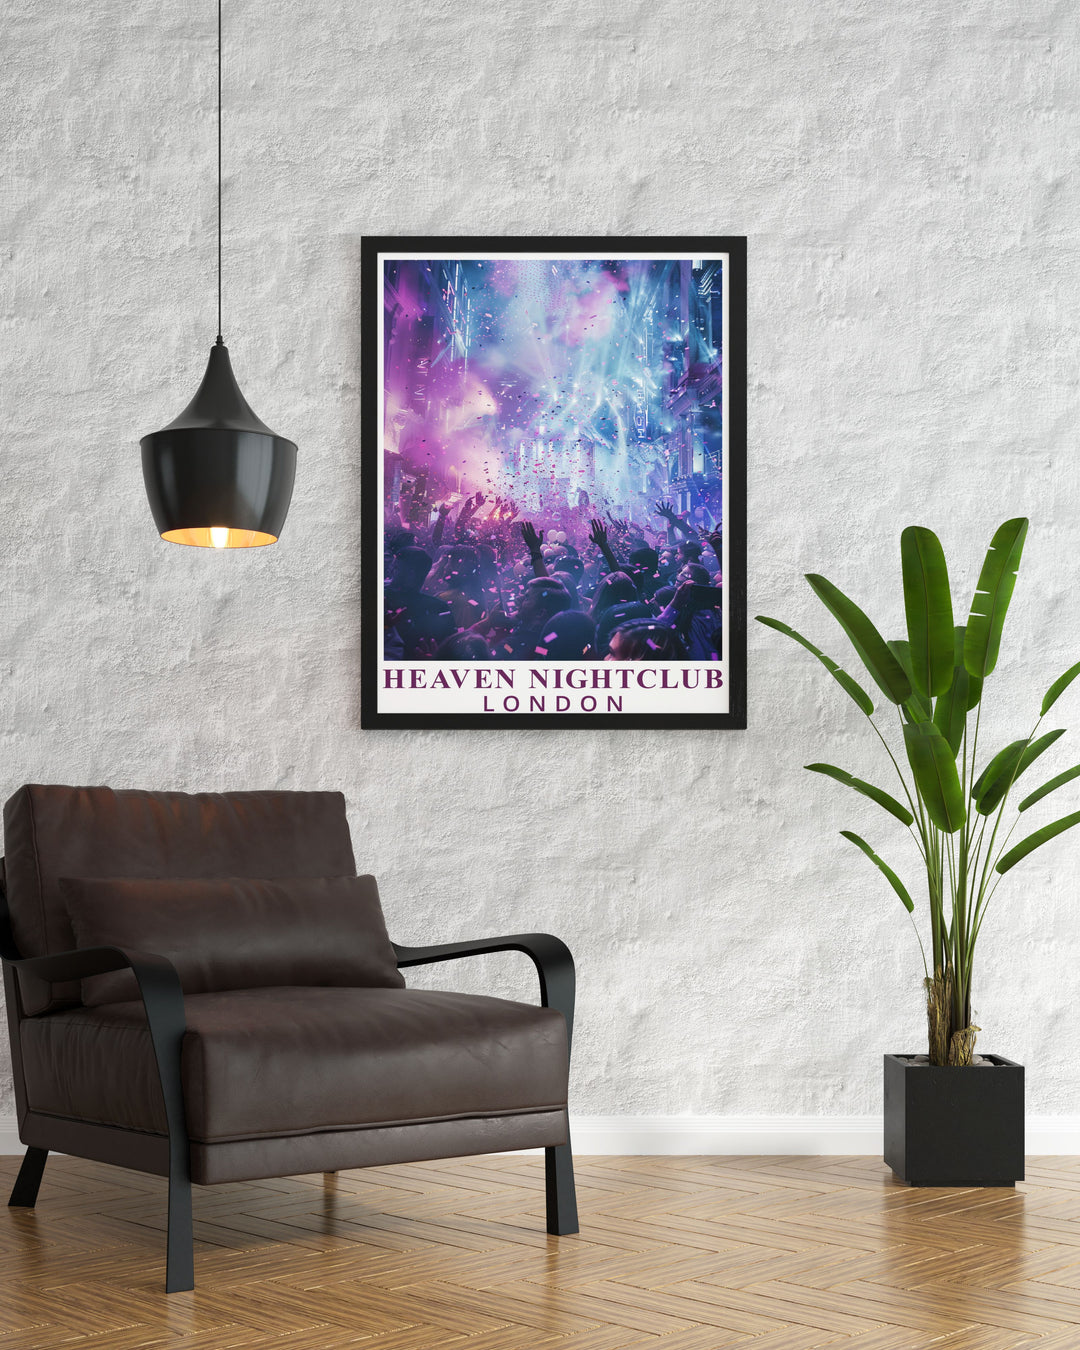 Highlighting the rich cultural heritage and vibrant surroundings of Heaven Nightclubs theme nights, this travel poster is a beautiful addition to any room.